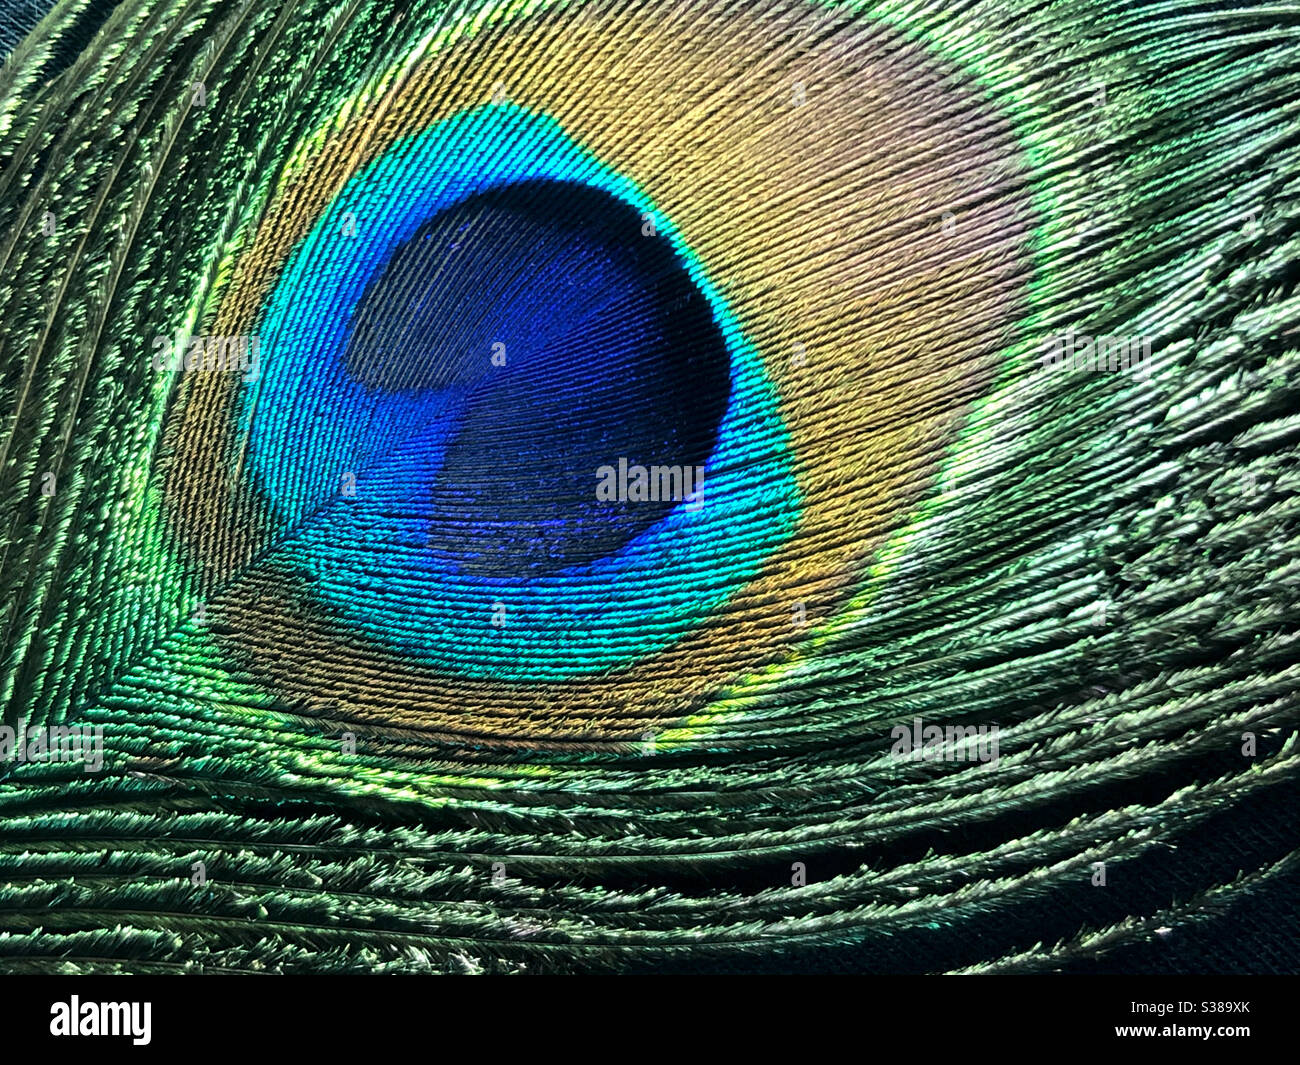 Close up of a single peacock feather on black background Stock Photo